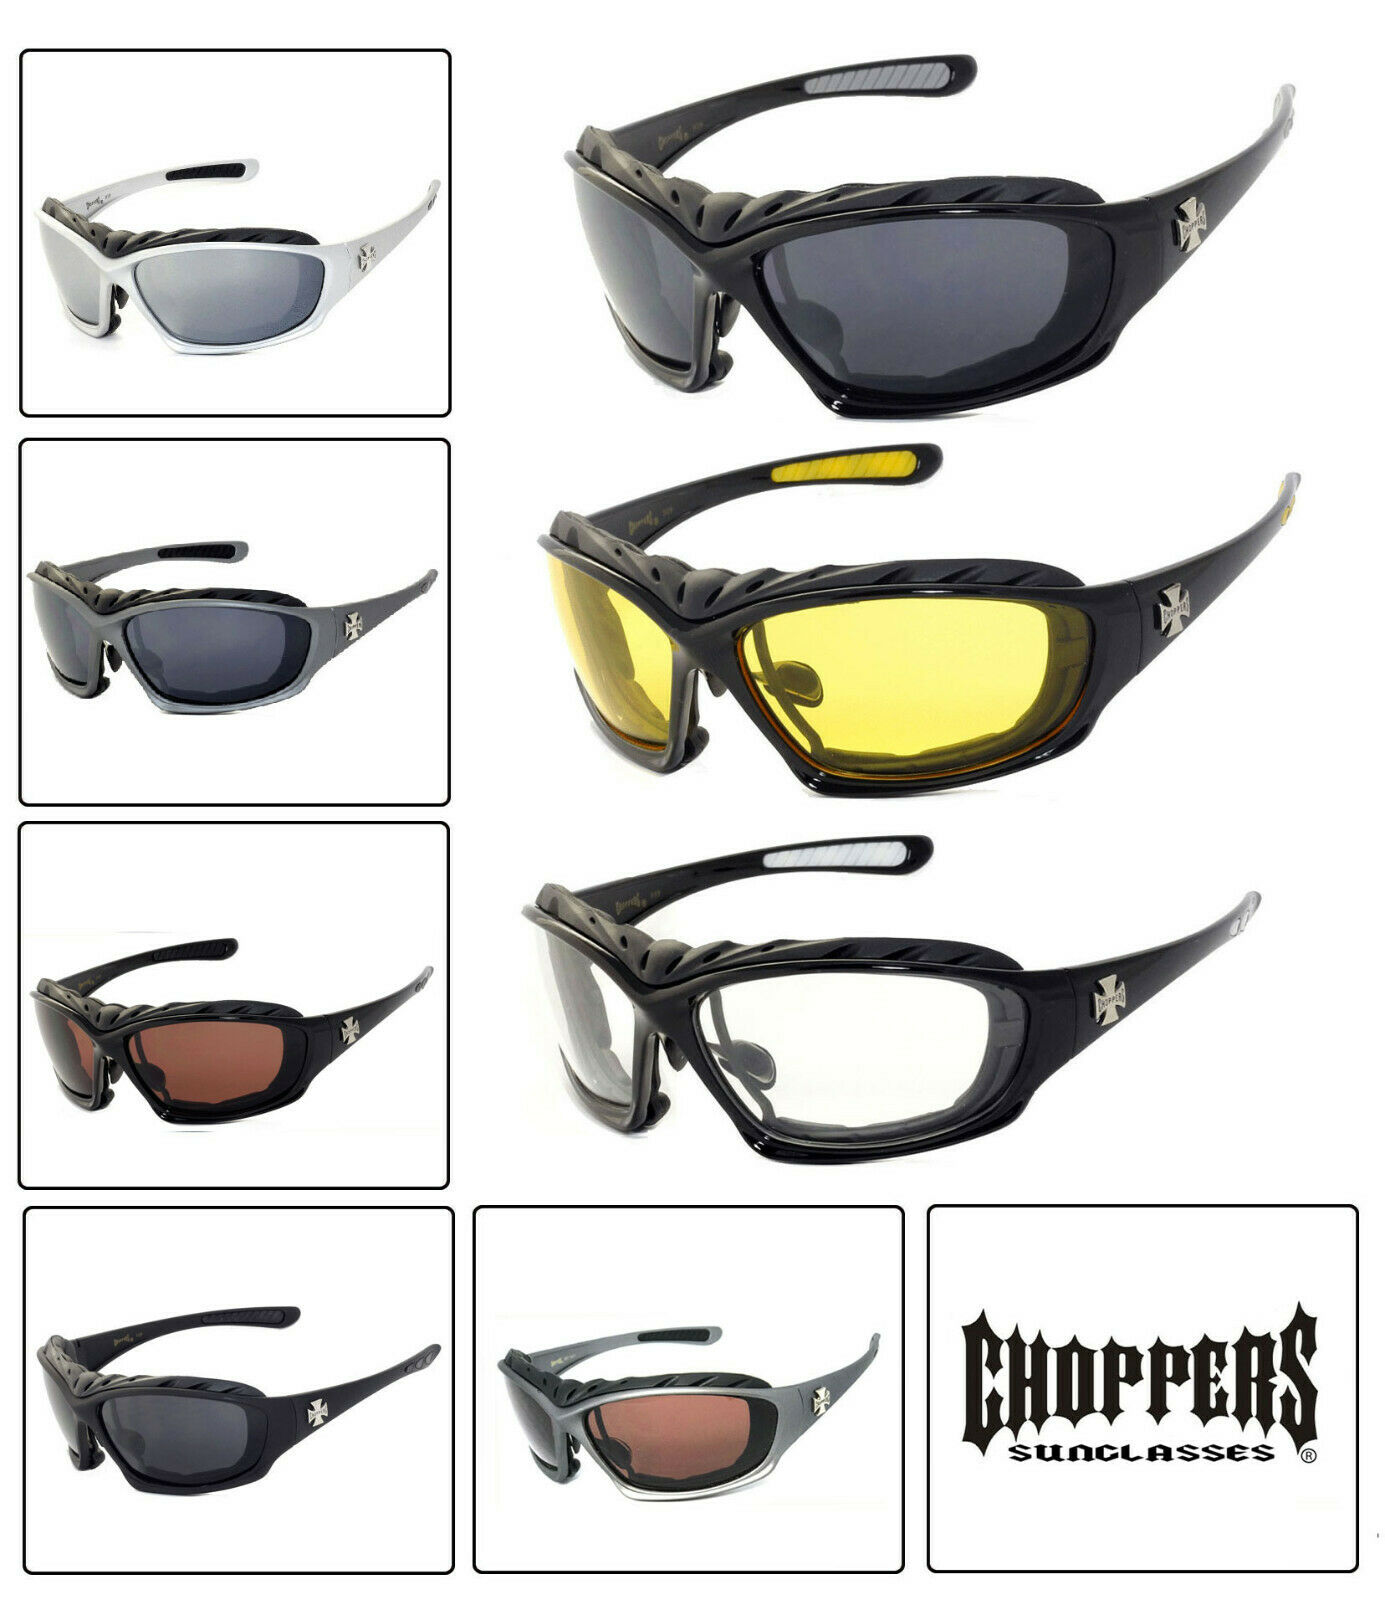 Choppers 919 Padded Foam Wind Resistant Sunglasses Motorcycle Glasses Uv Protect